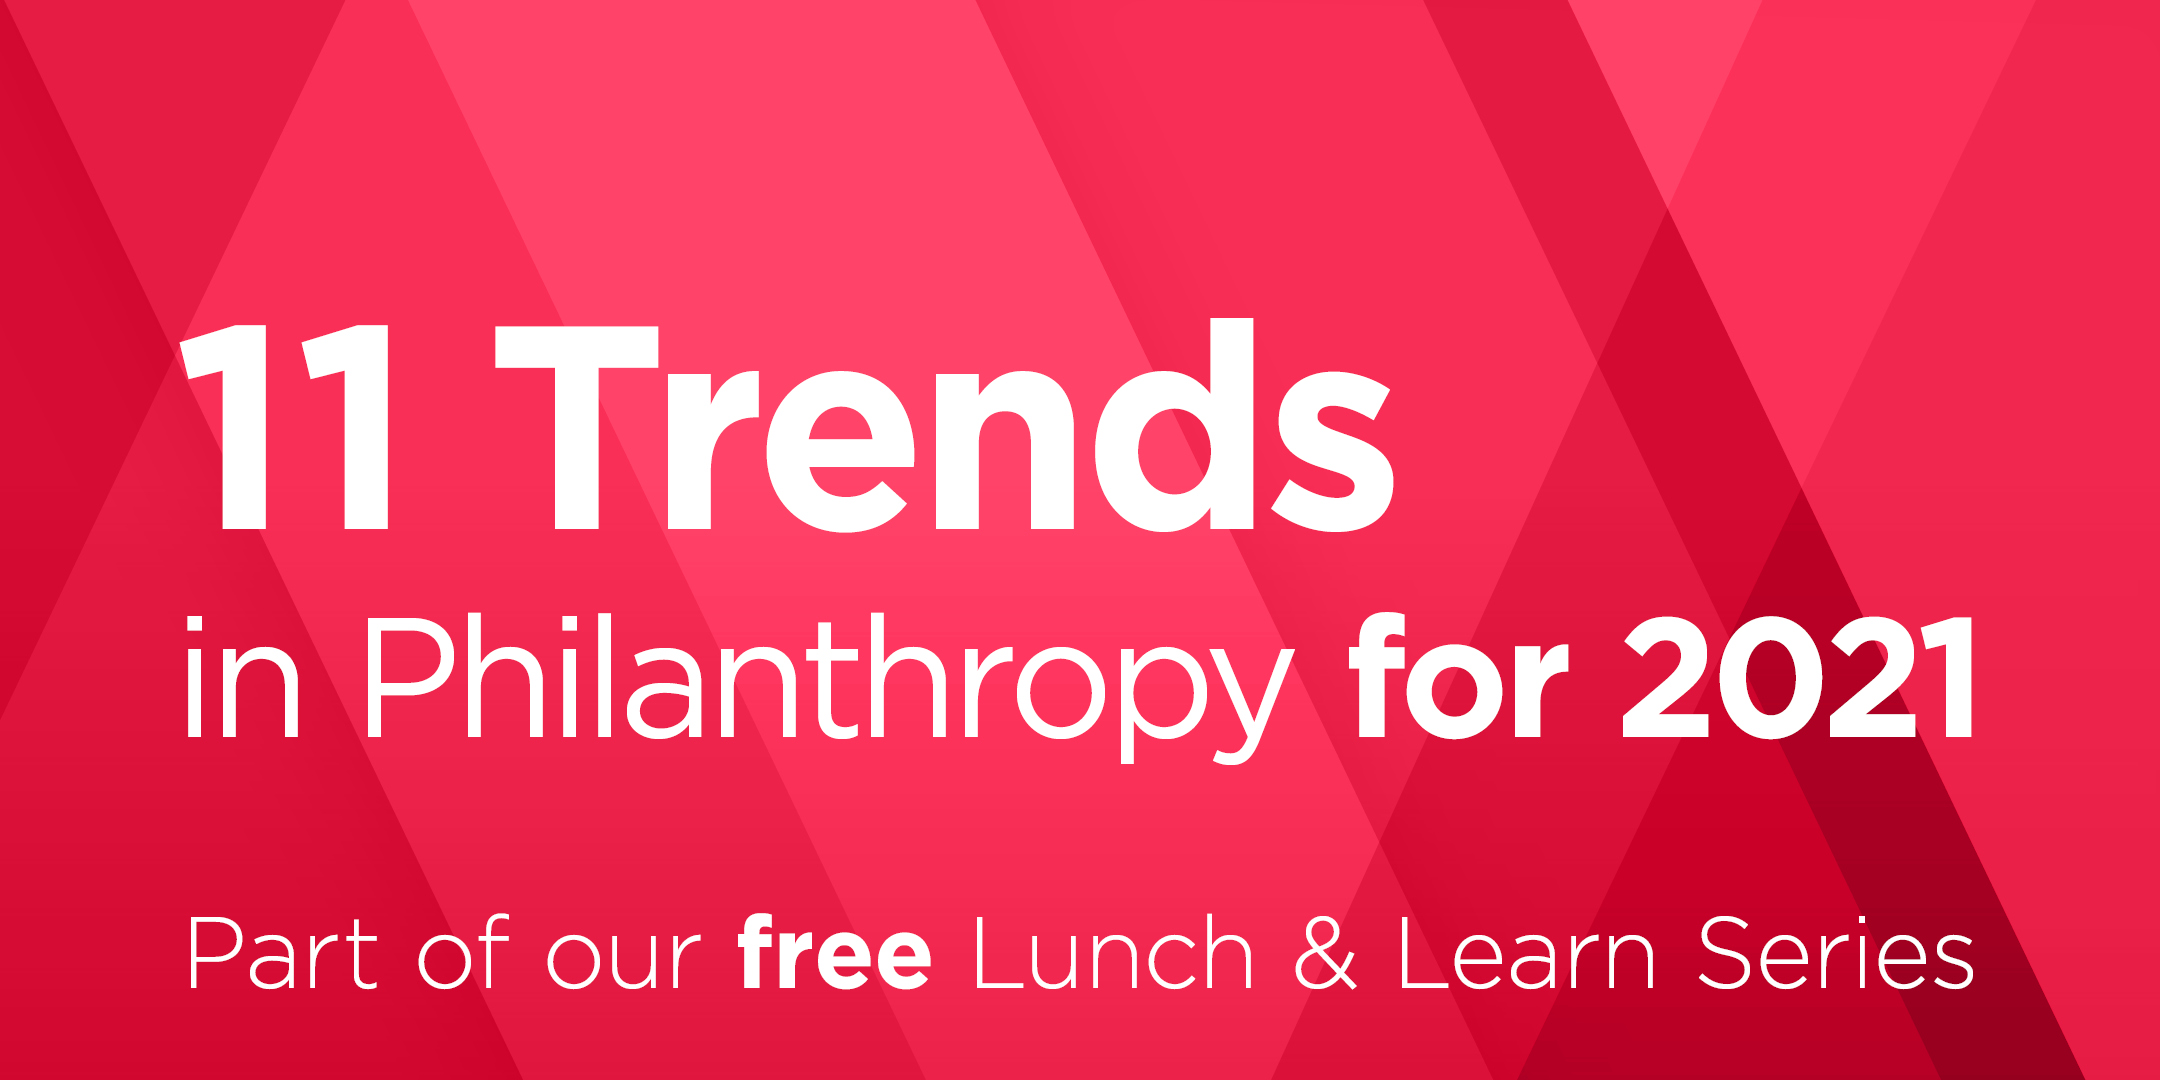 Lunch & Learn - 11 Trends in Philanthropy for 2021